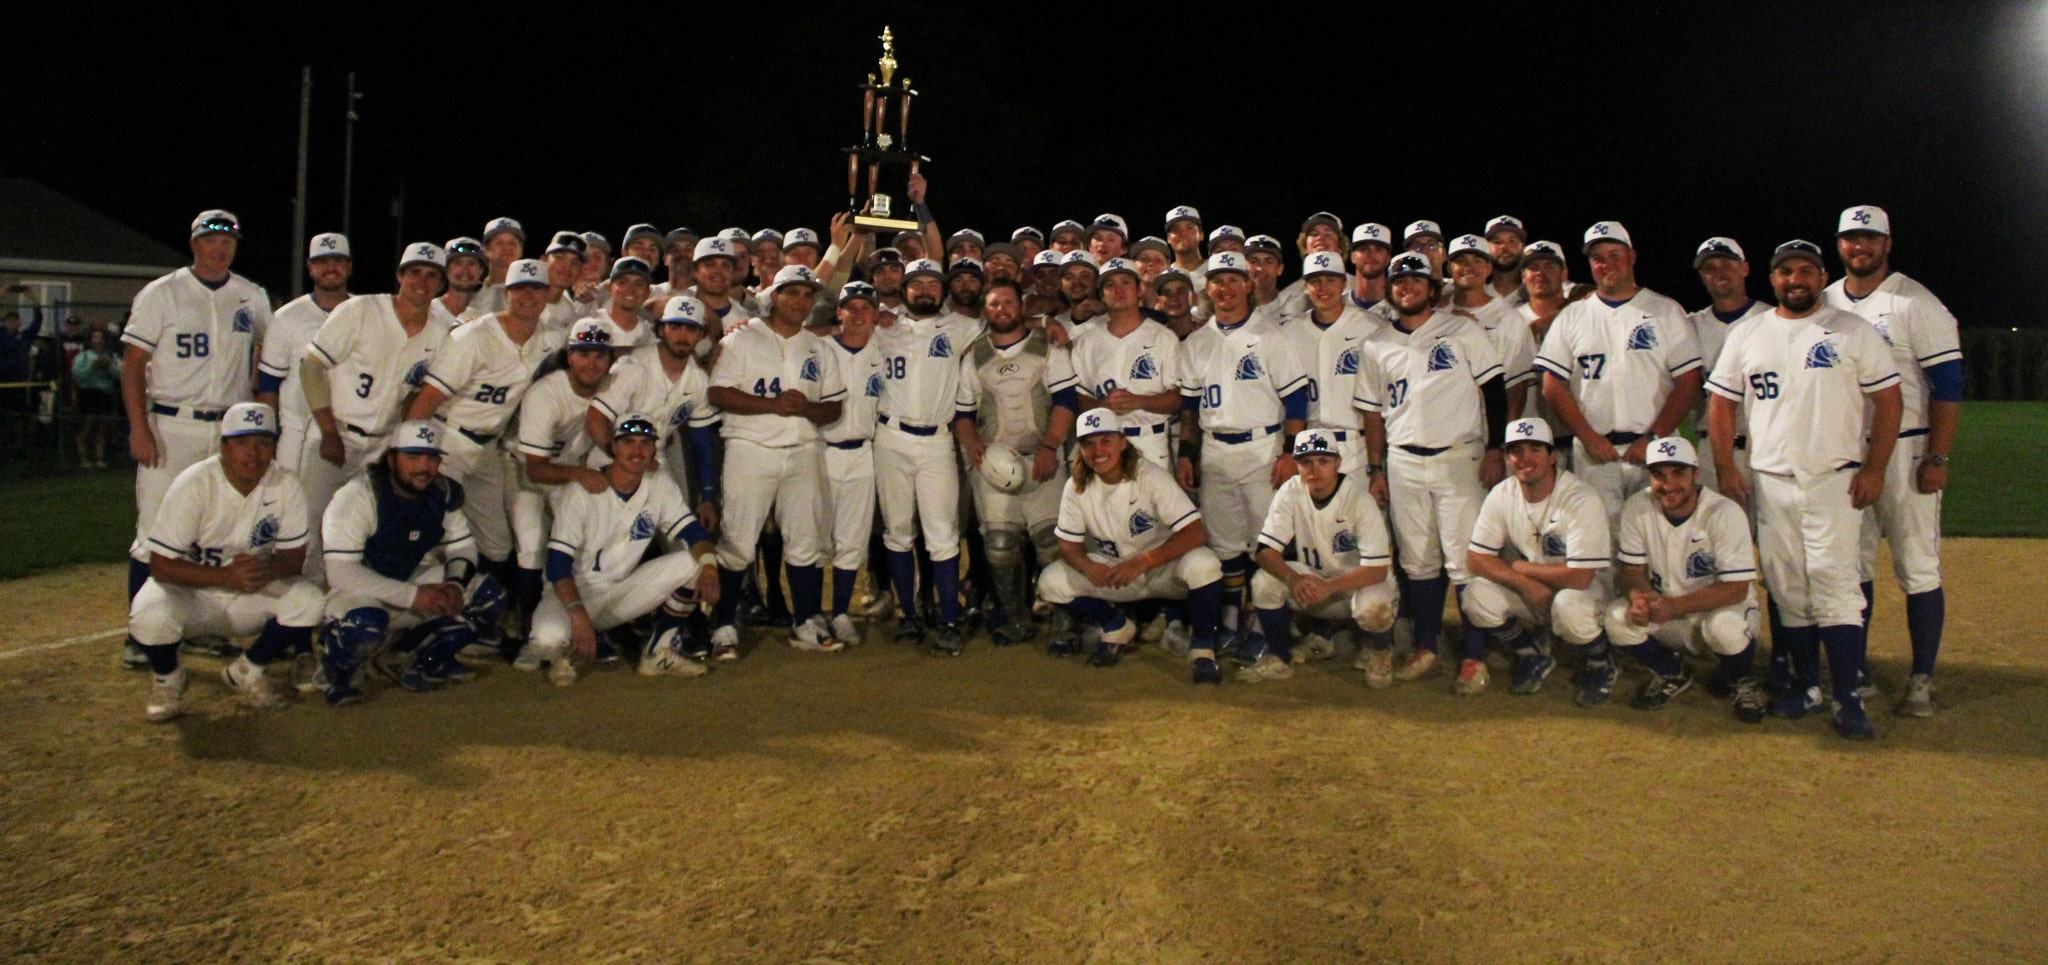 Charger baseball hold trophy